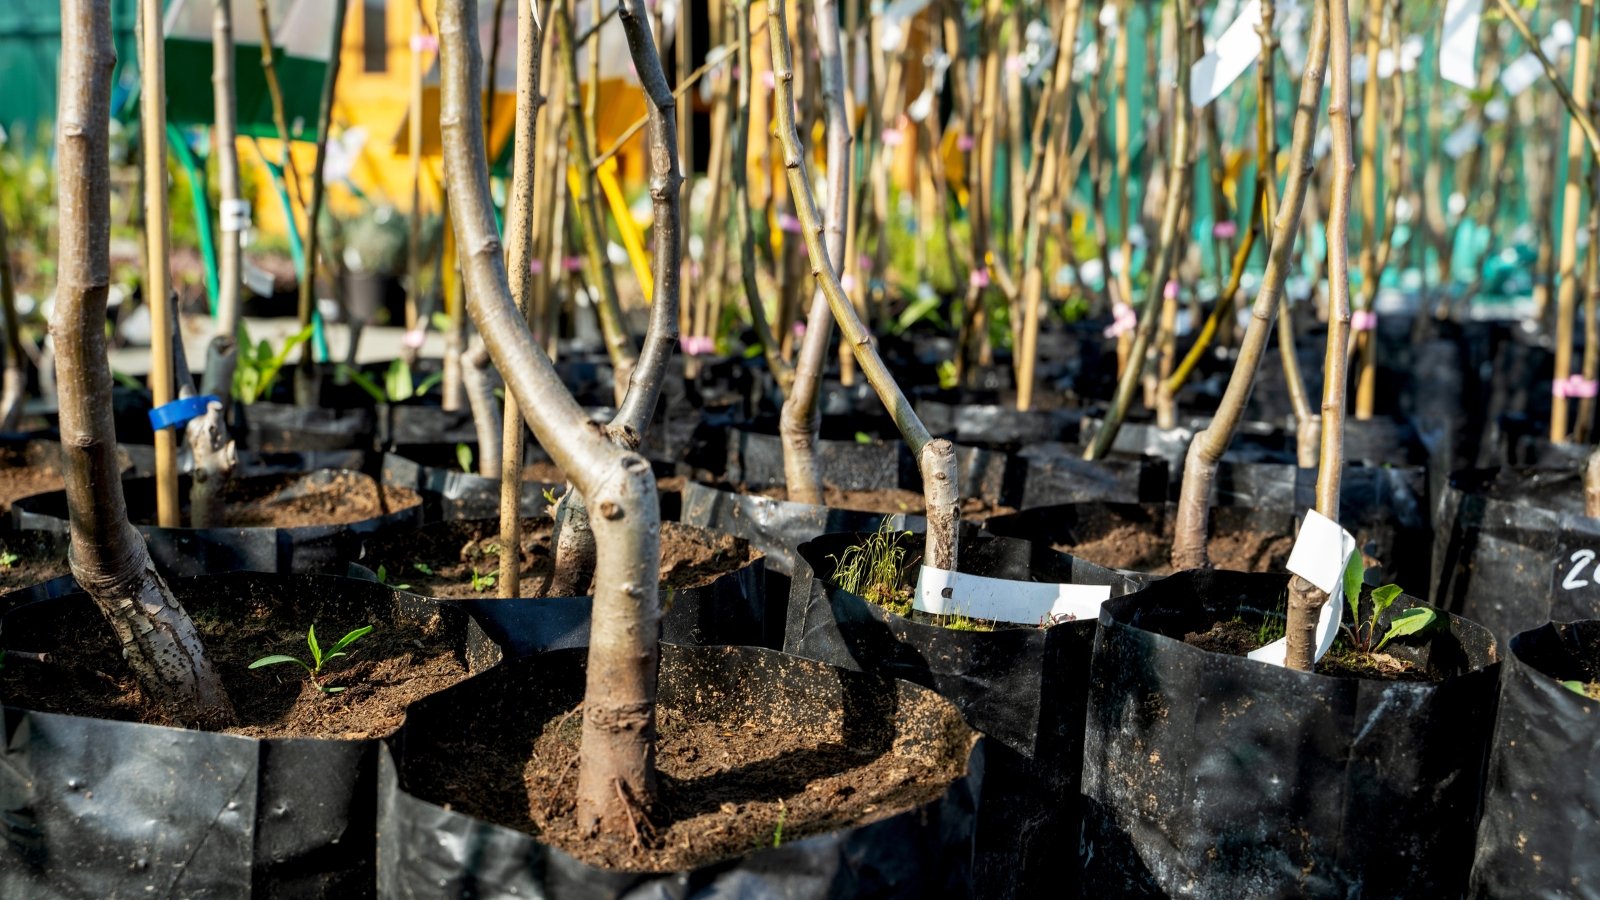 Close-up of many young fruit tree seedlings in black bags in a nursery.